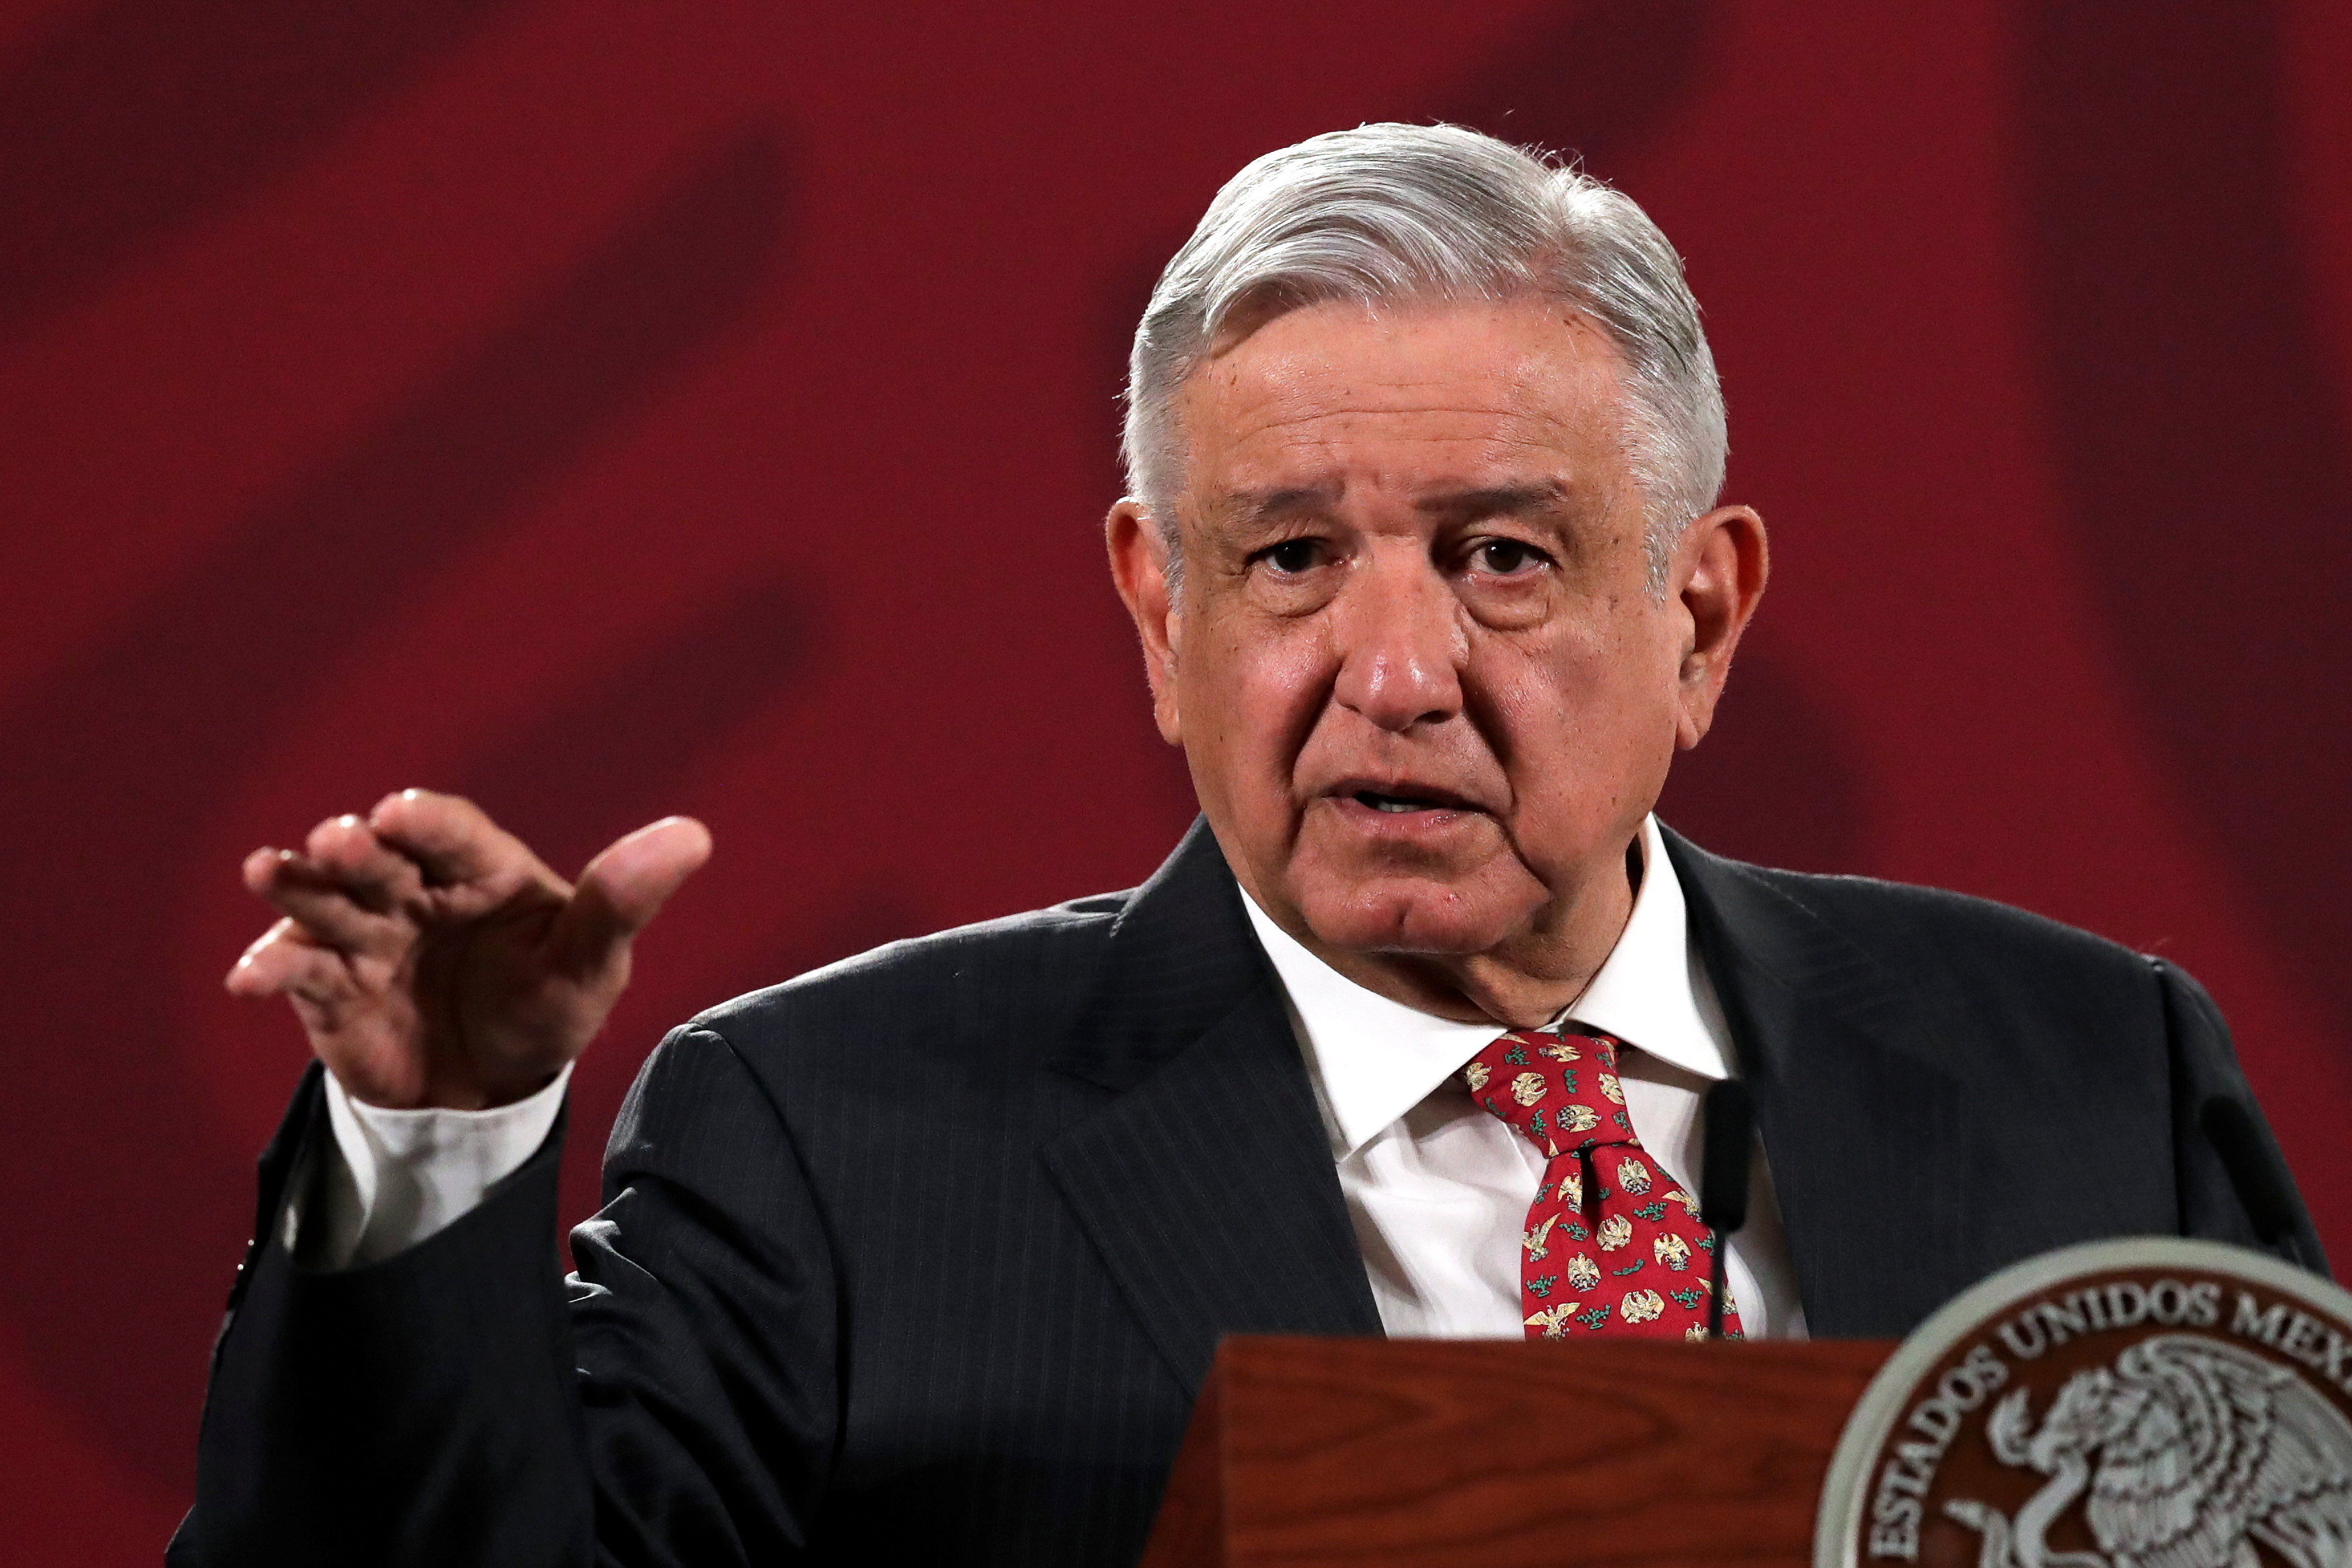 Mexico's President Andres Manuel Lopez Obrador speaks during a news conference at the National Palace in Mexico City, Mexico June 30, 2020. Picture taken June 30, 2020. REUTERS/Henry Romero